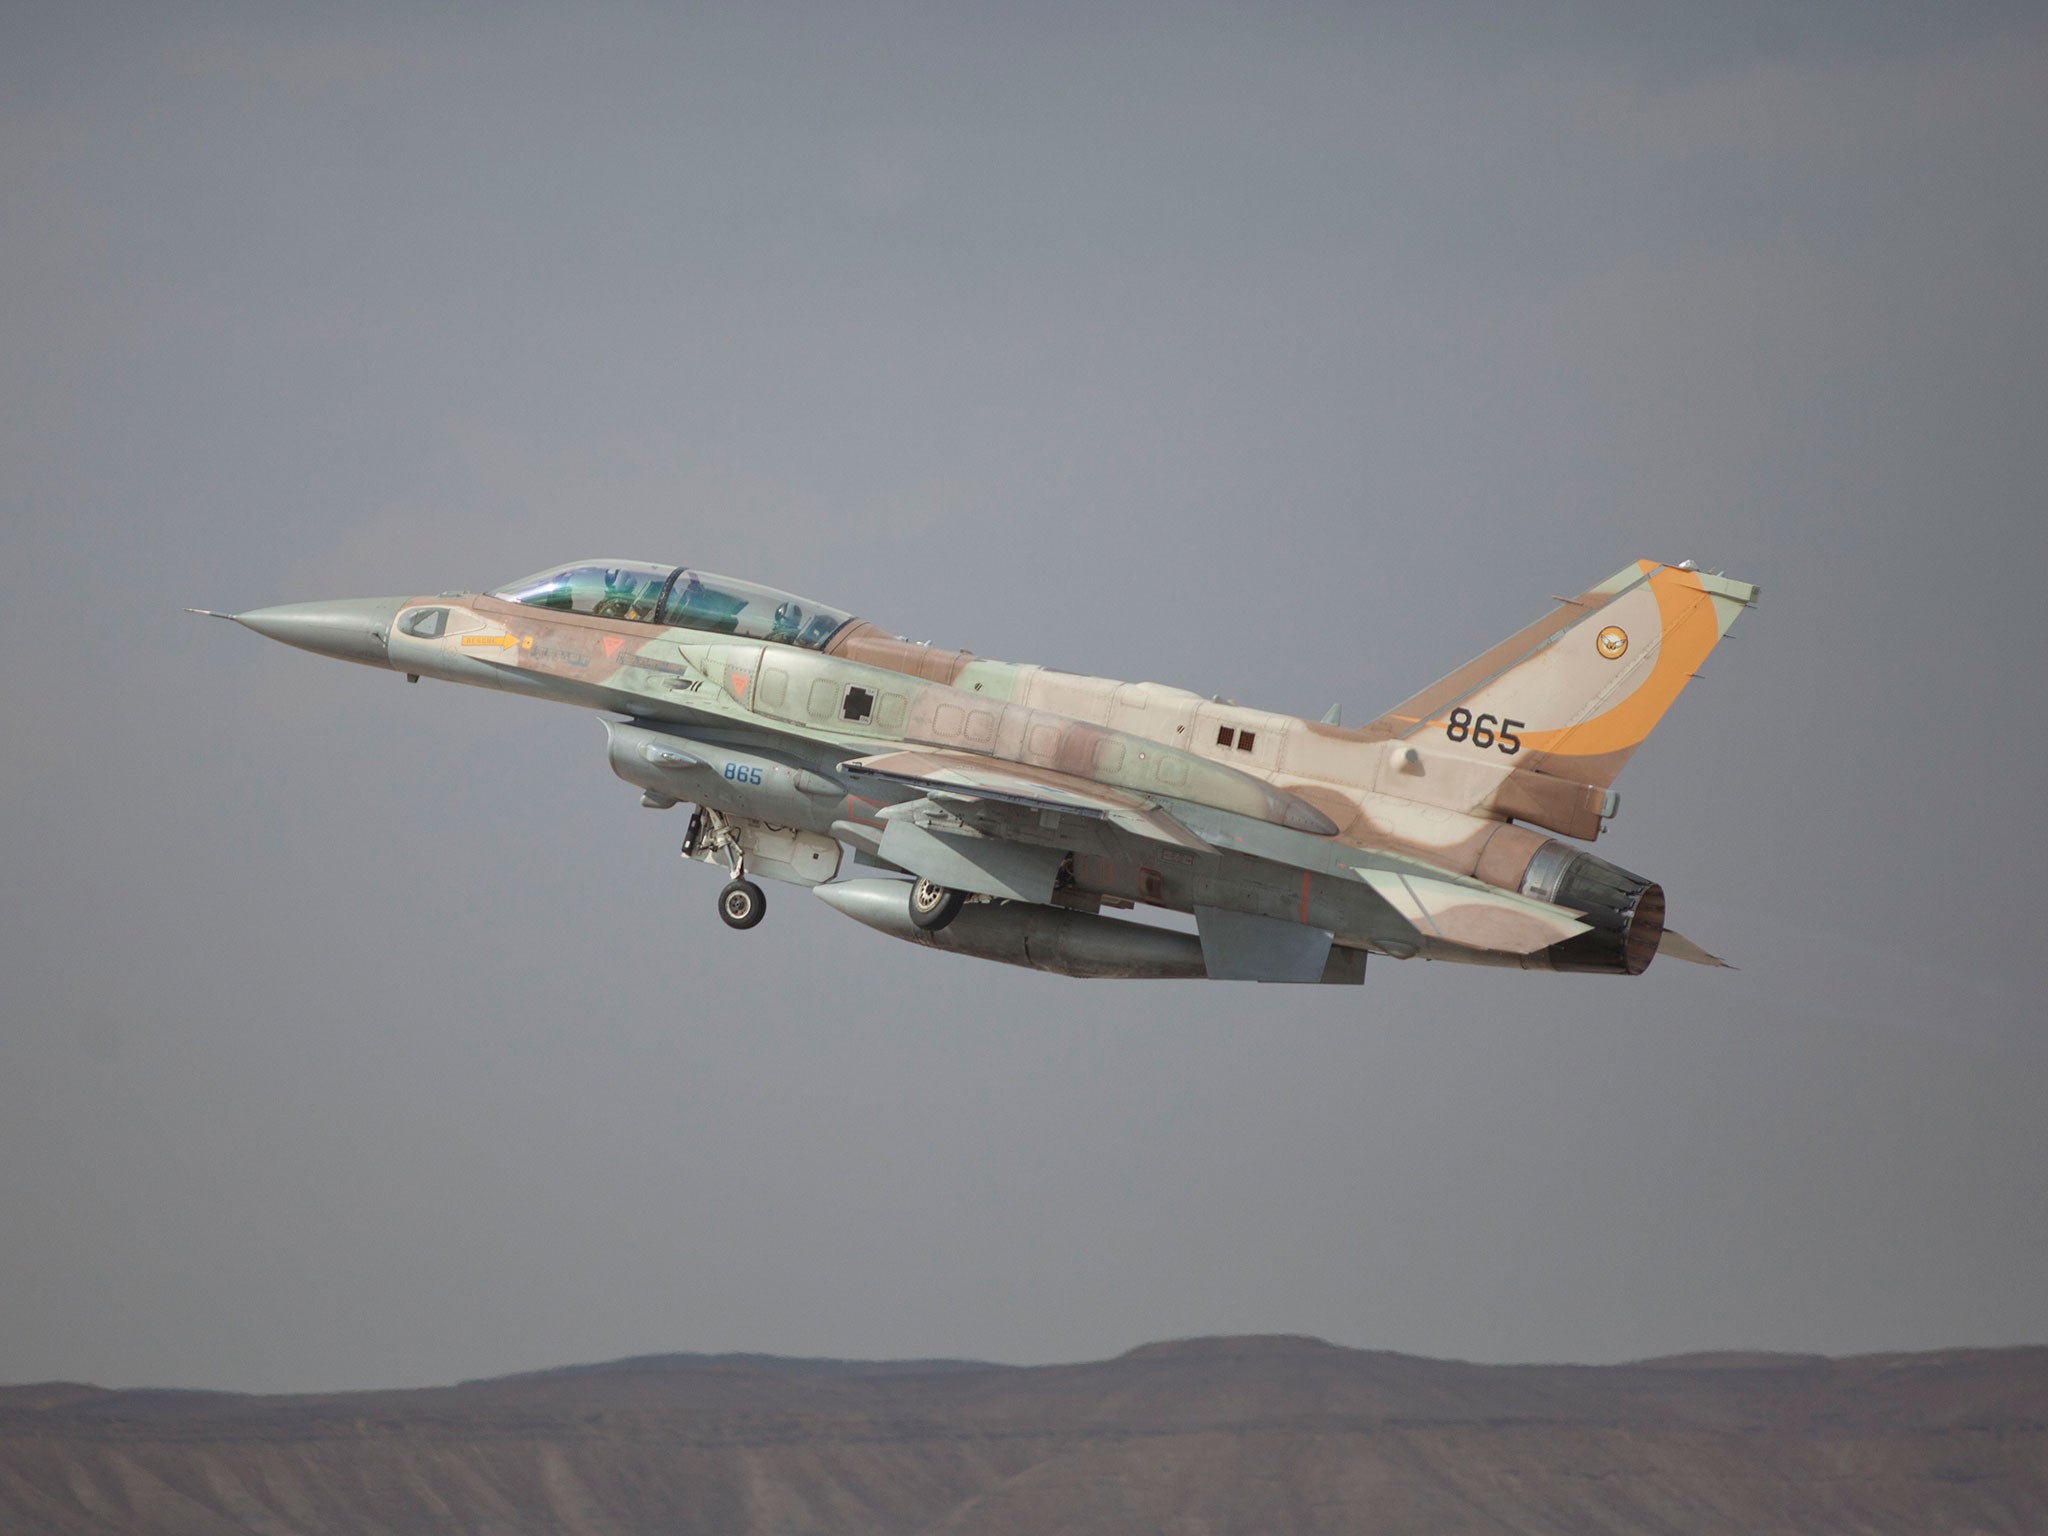 An Israeli F-16 jet takes off on December 9, 2014 at the Ovda airbase in the Negev Desert near Eilat, southern Israel.